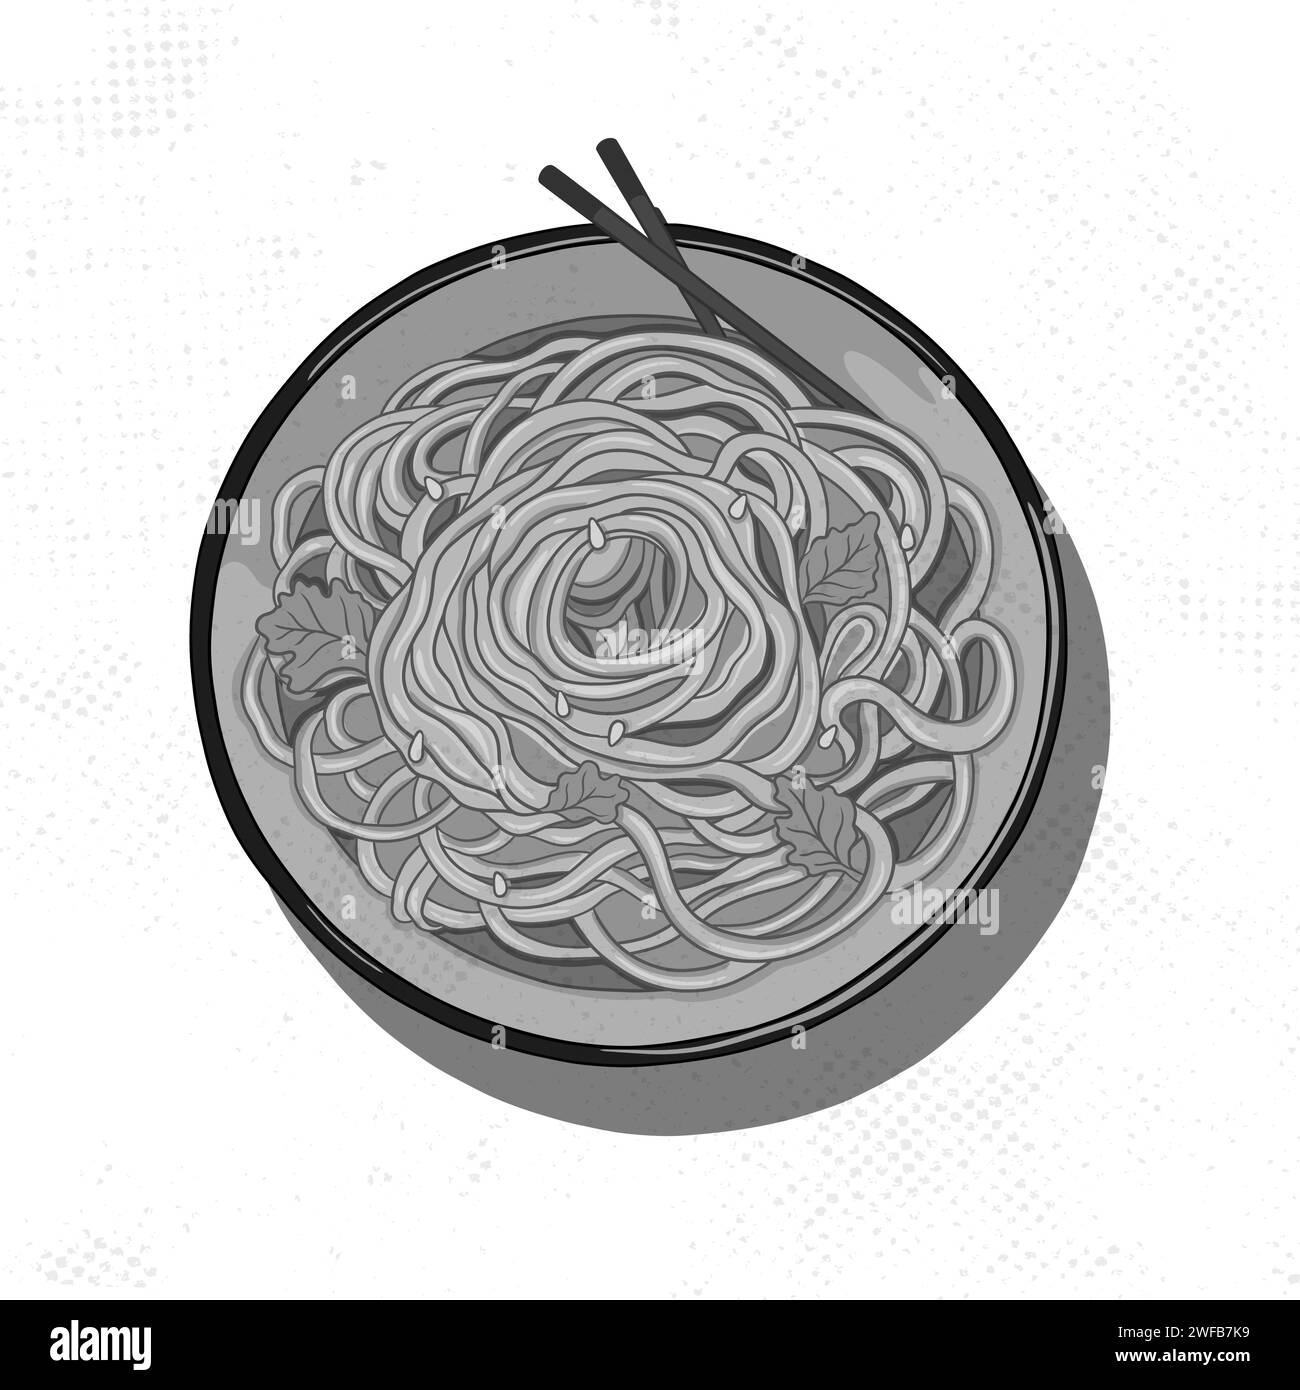 Chinese noodles in a plate with chopsticks. Cooked noodles with green leaves top view. Illustration in outline style suitable for a cafe menu. Stock Vector